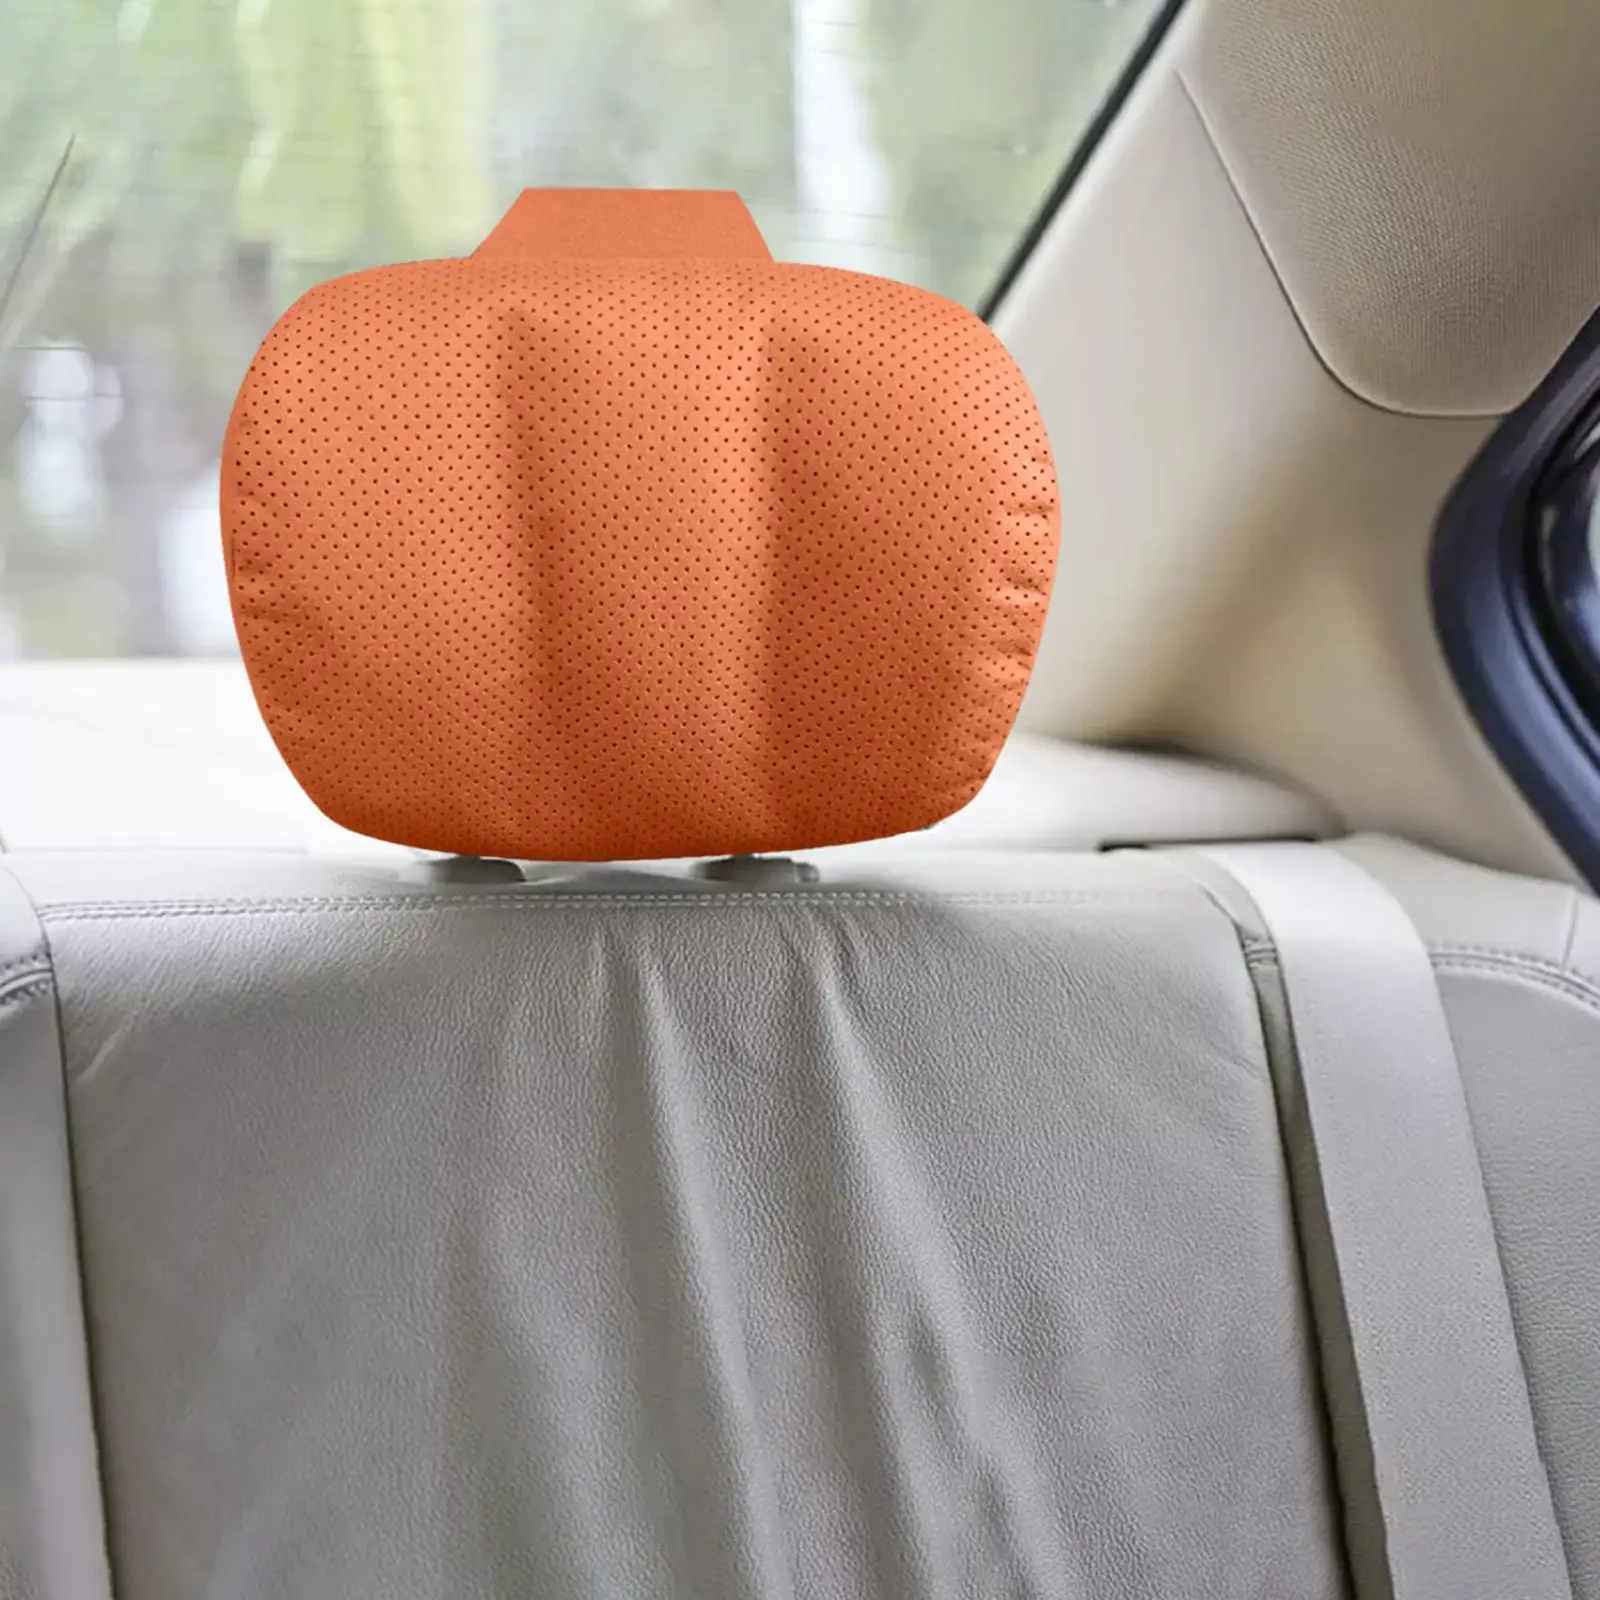 Car Seat Pillow Portable Head Rest Pillows for Home Office Driving Seat